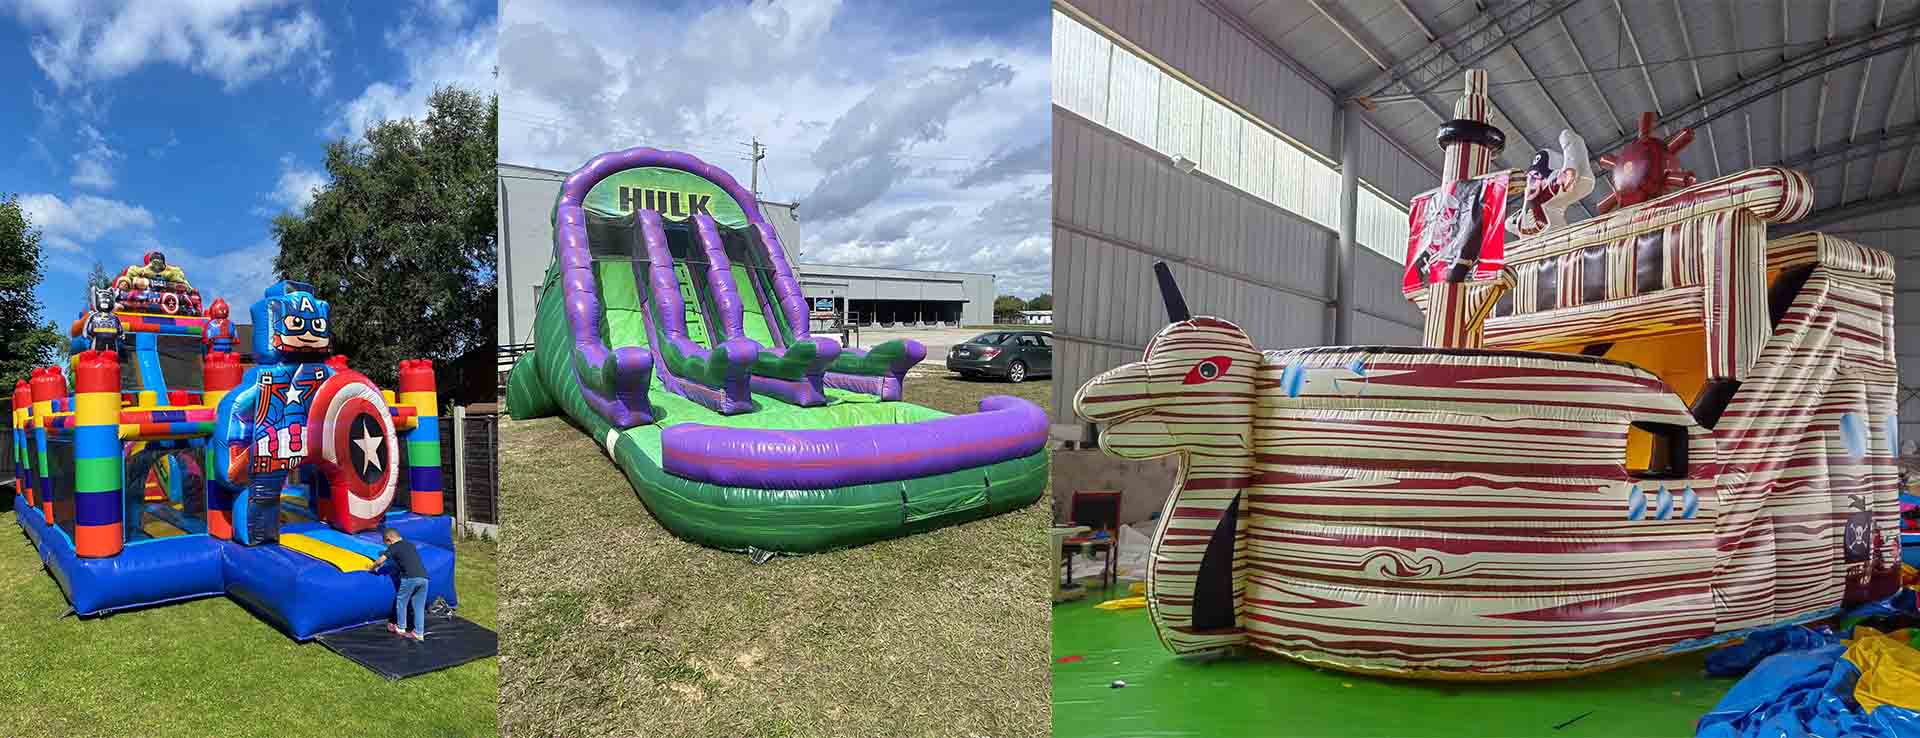 Commercial inflatable slide for sale